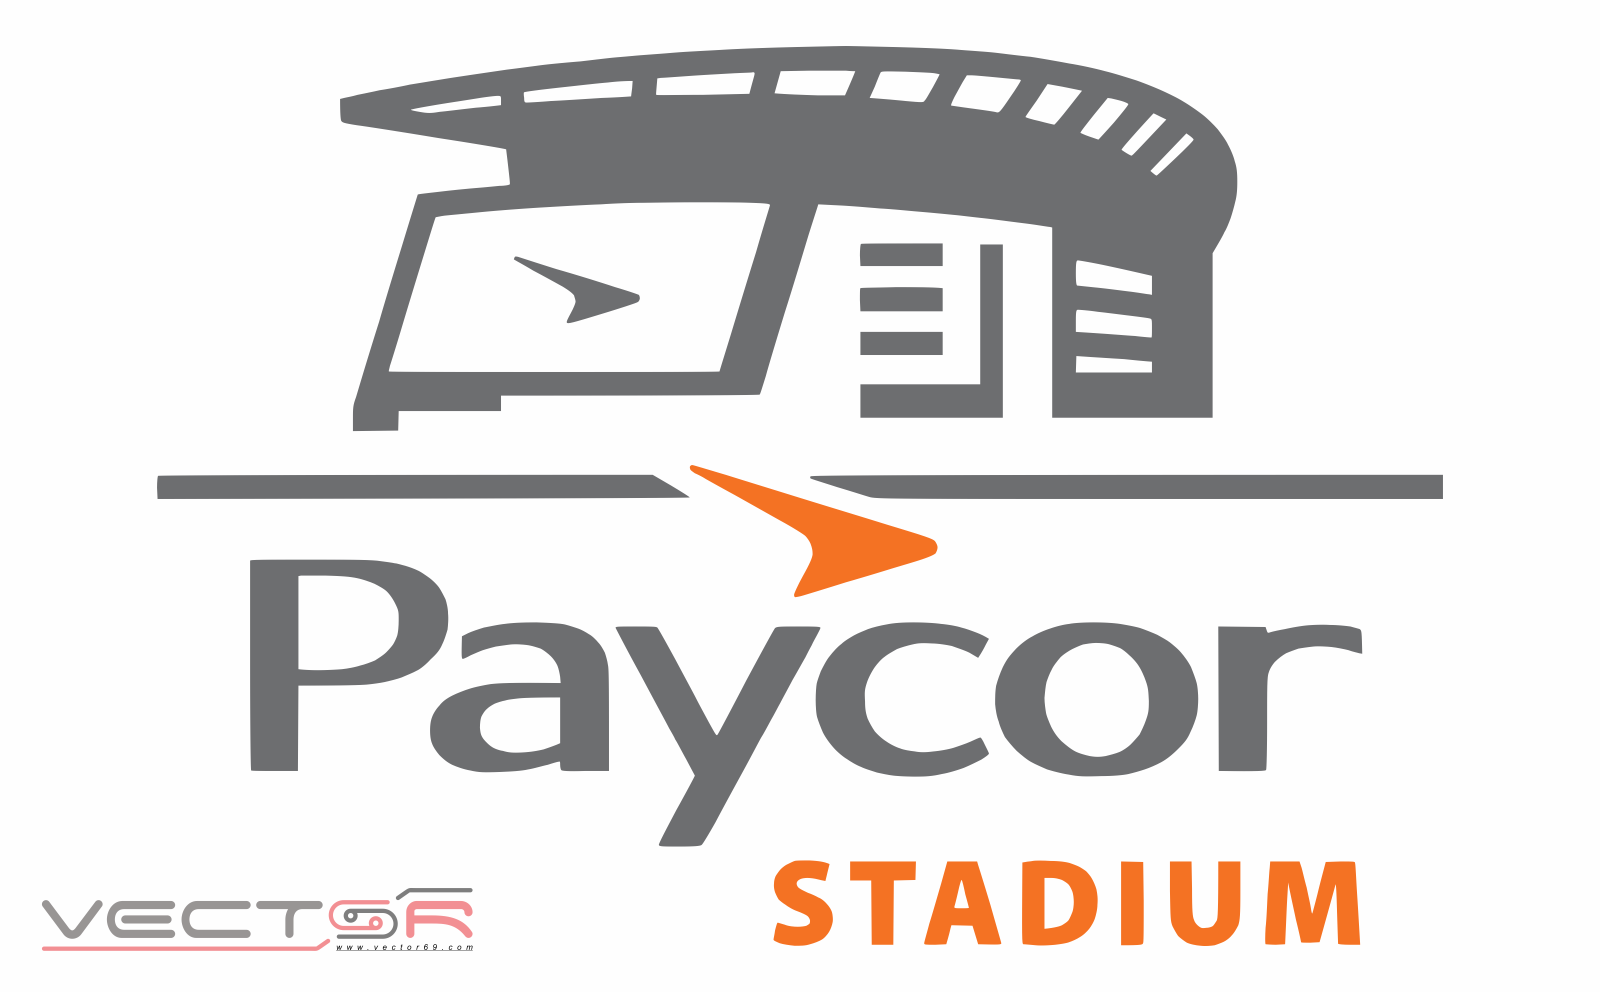 Paycor Stadium Logo - Download Transparent Images, Portable Network Graphics (.PNG)